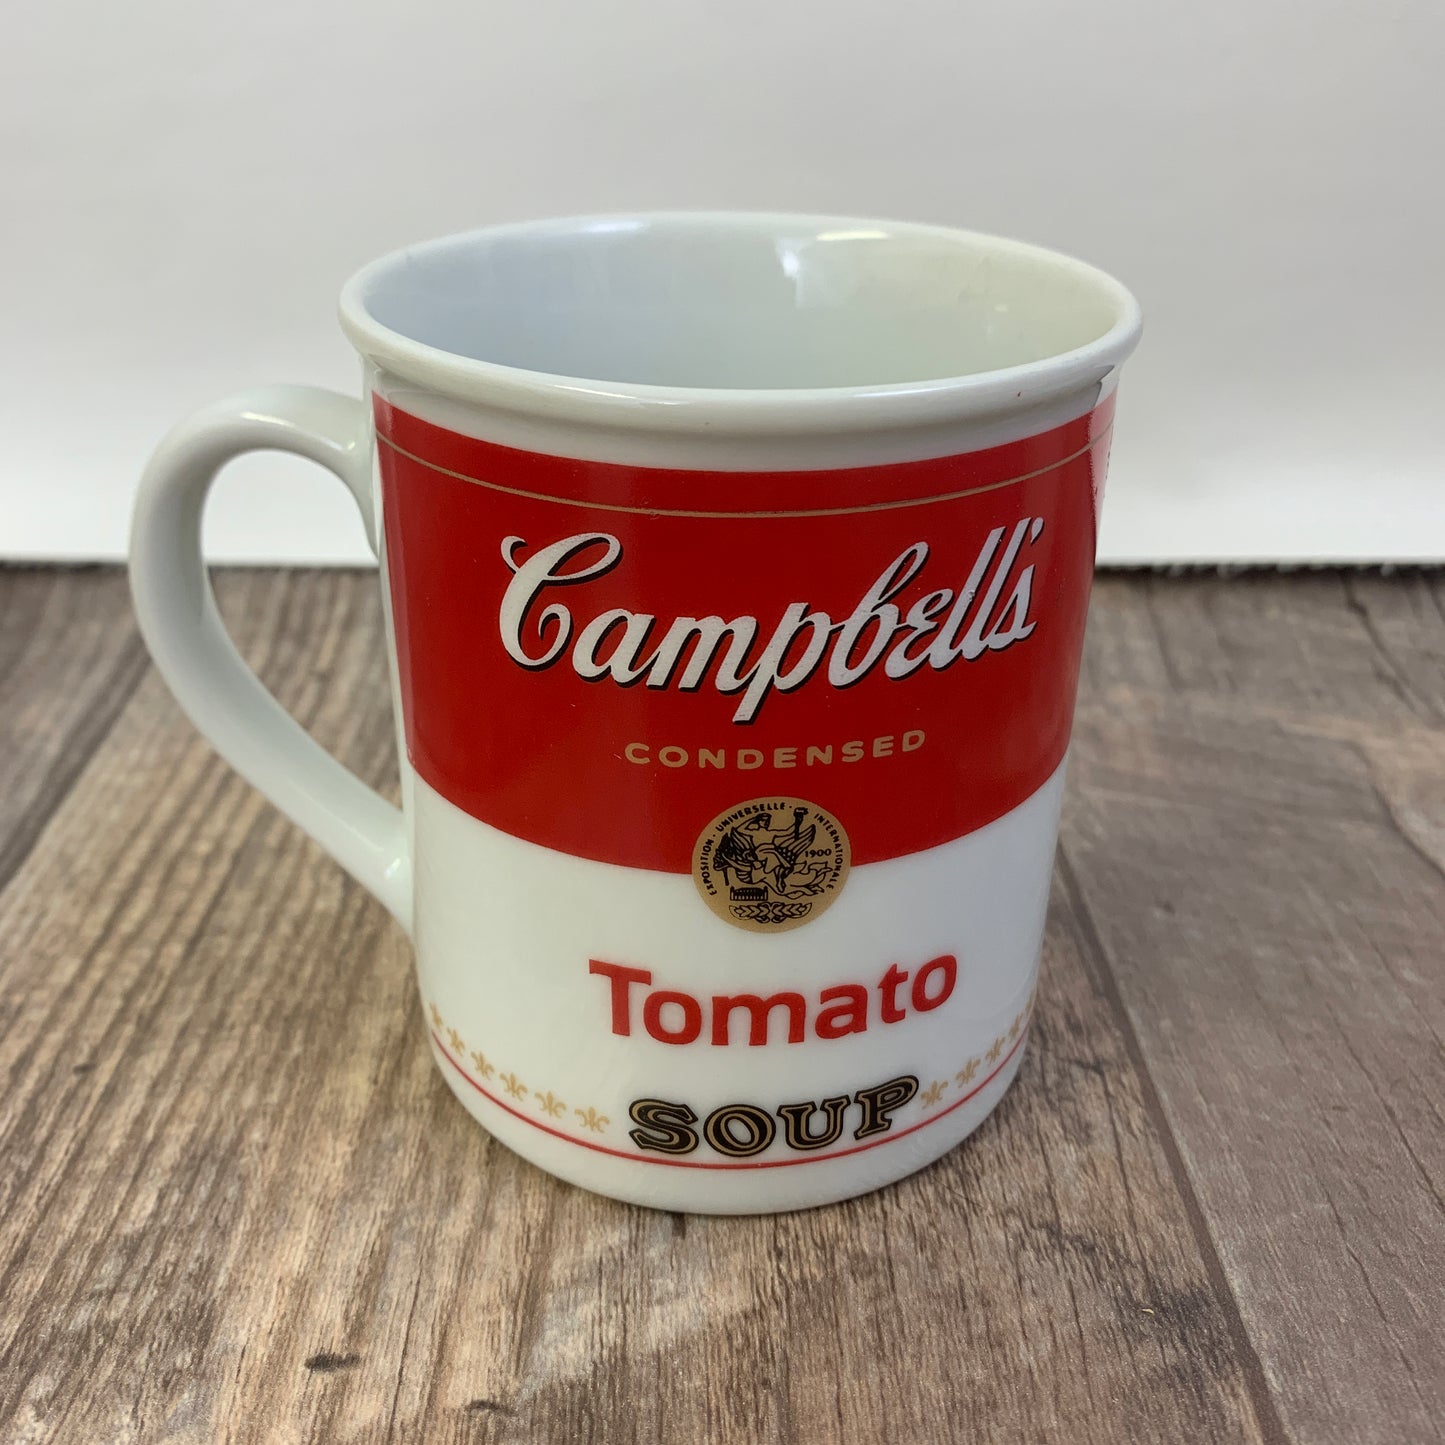 Pair of Campbells Soup Mugs, 125th Anniversary of Campbell’s Soup Commemorative Mug